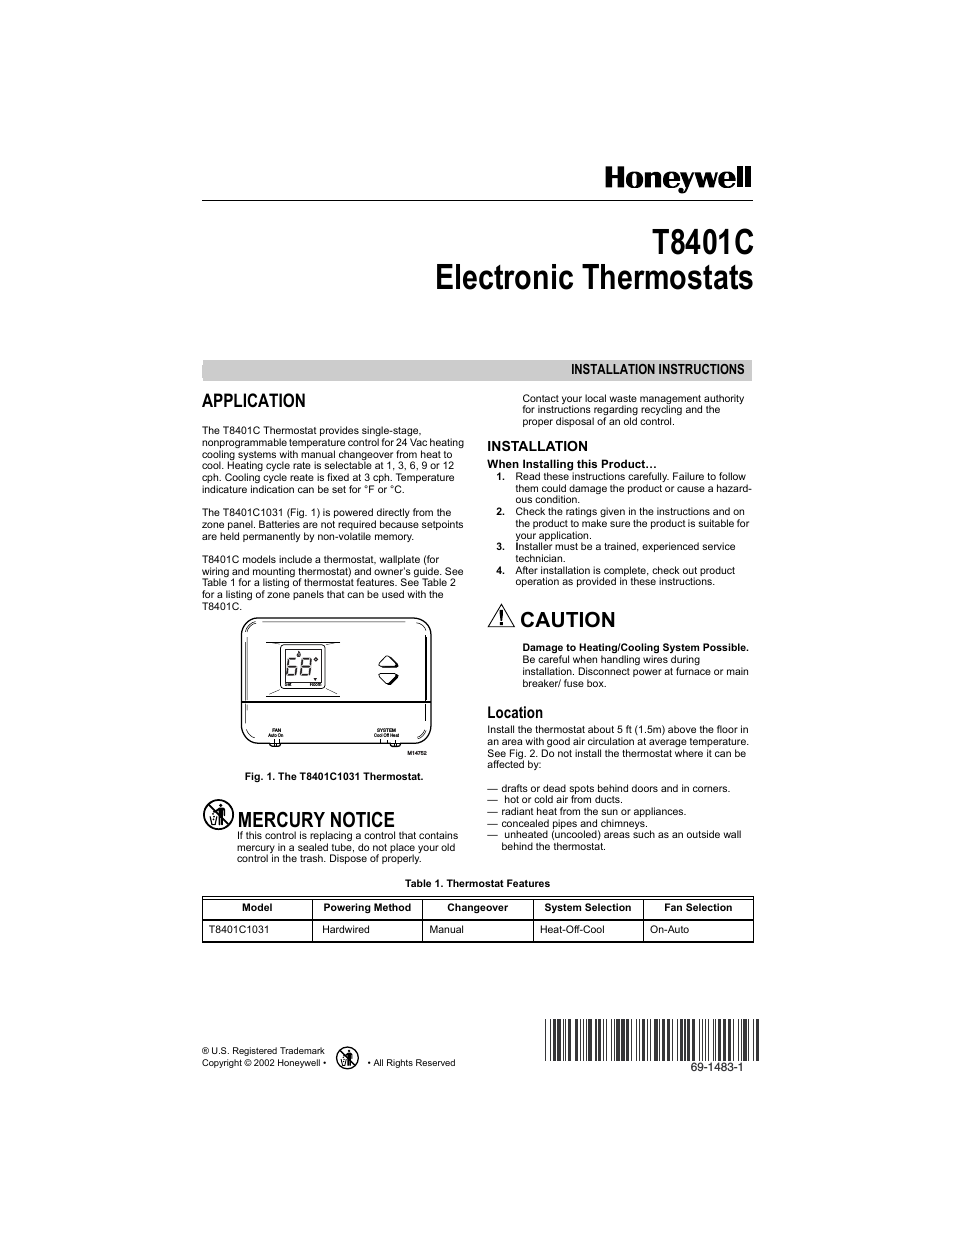 ELECTRONIC THERMOSTATS T8401C